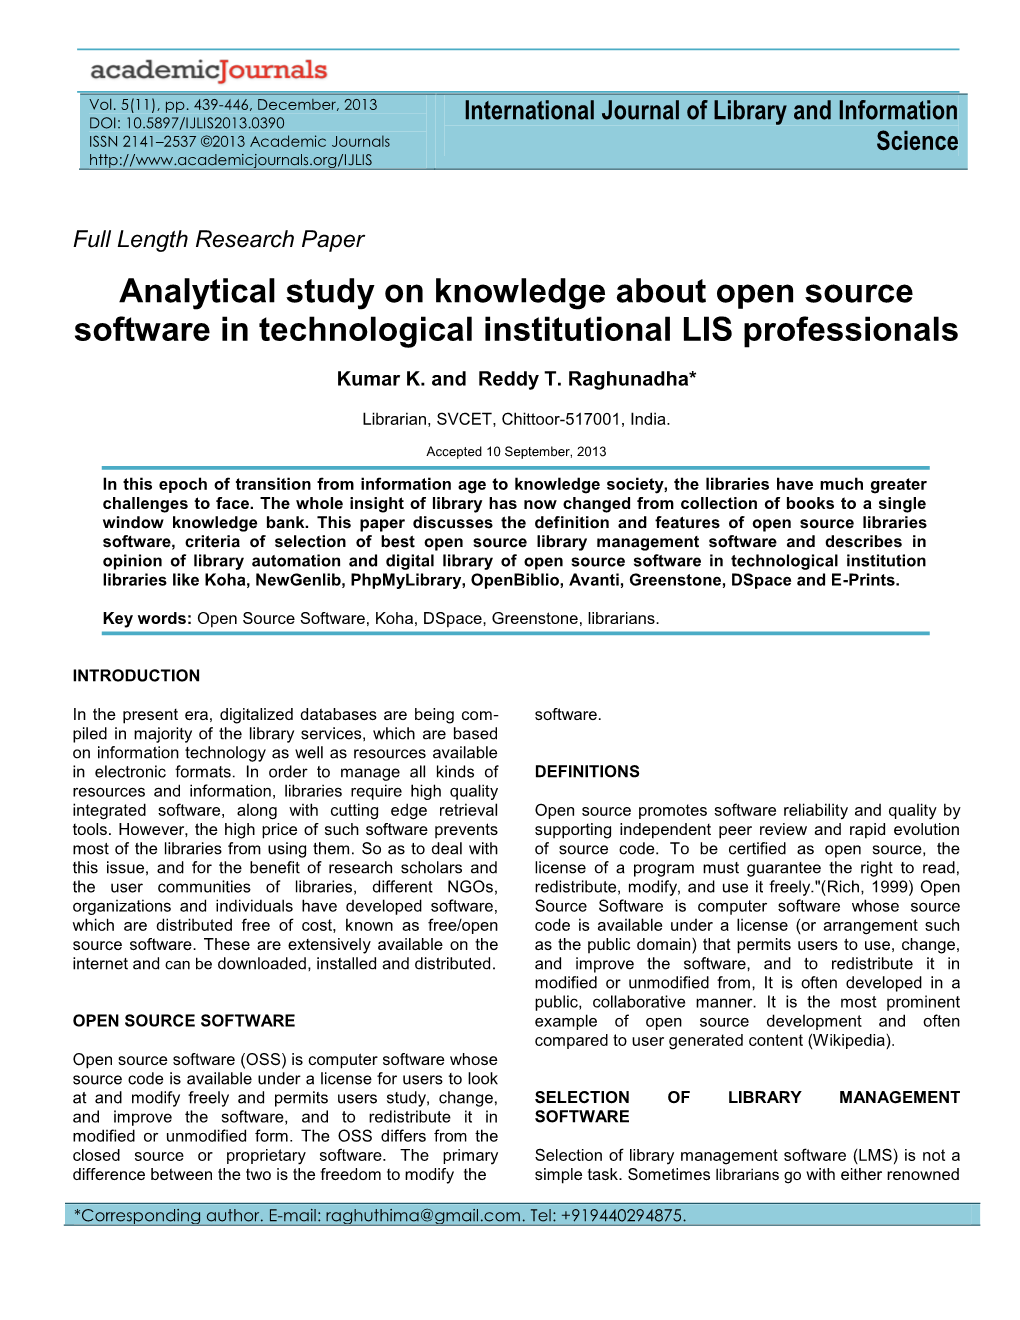 Analytical Study on Knowledge About Open Source Software in Technological Institutional LIS Professionals